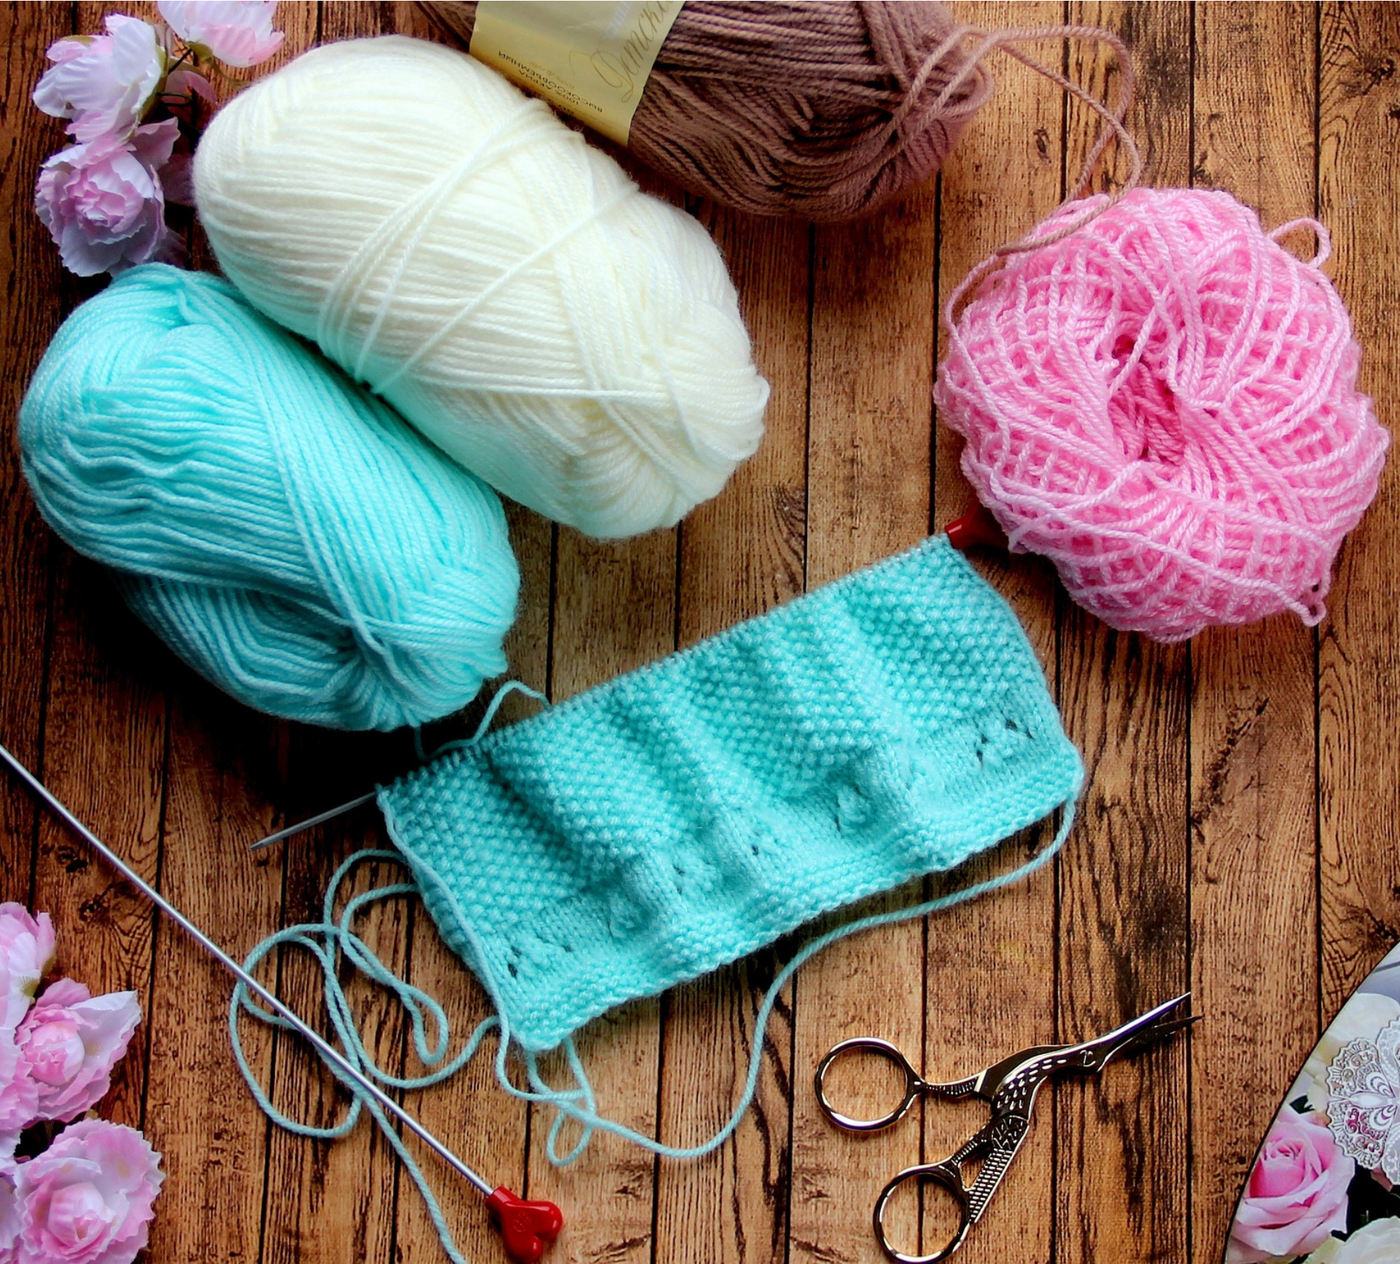 Choosing the Perfect Yarn for Your Crochet Project